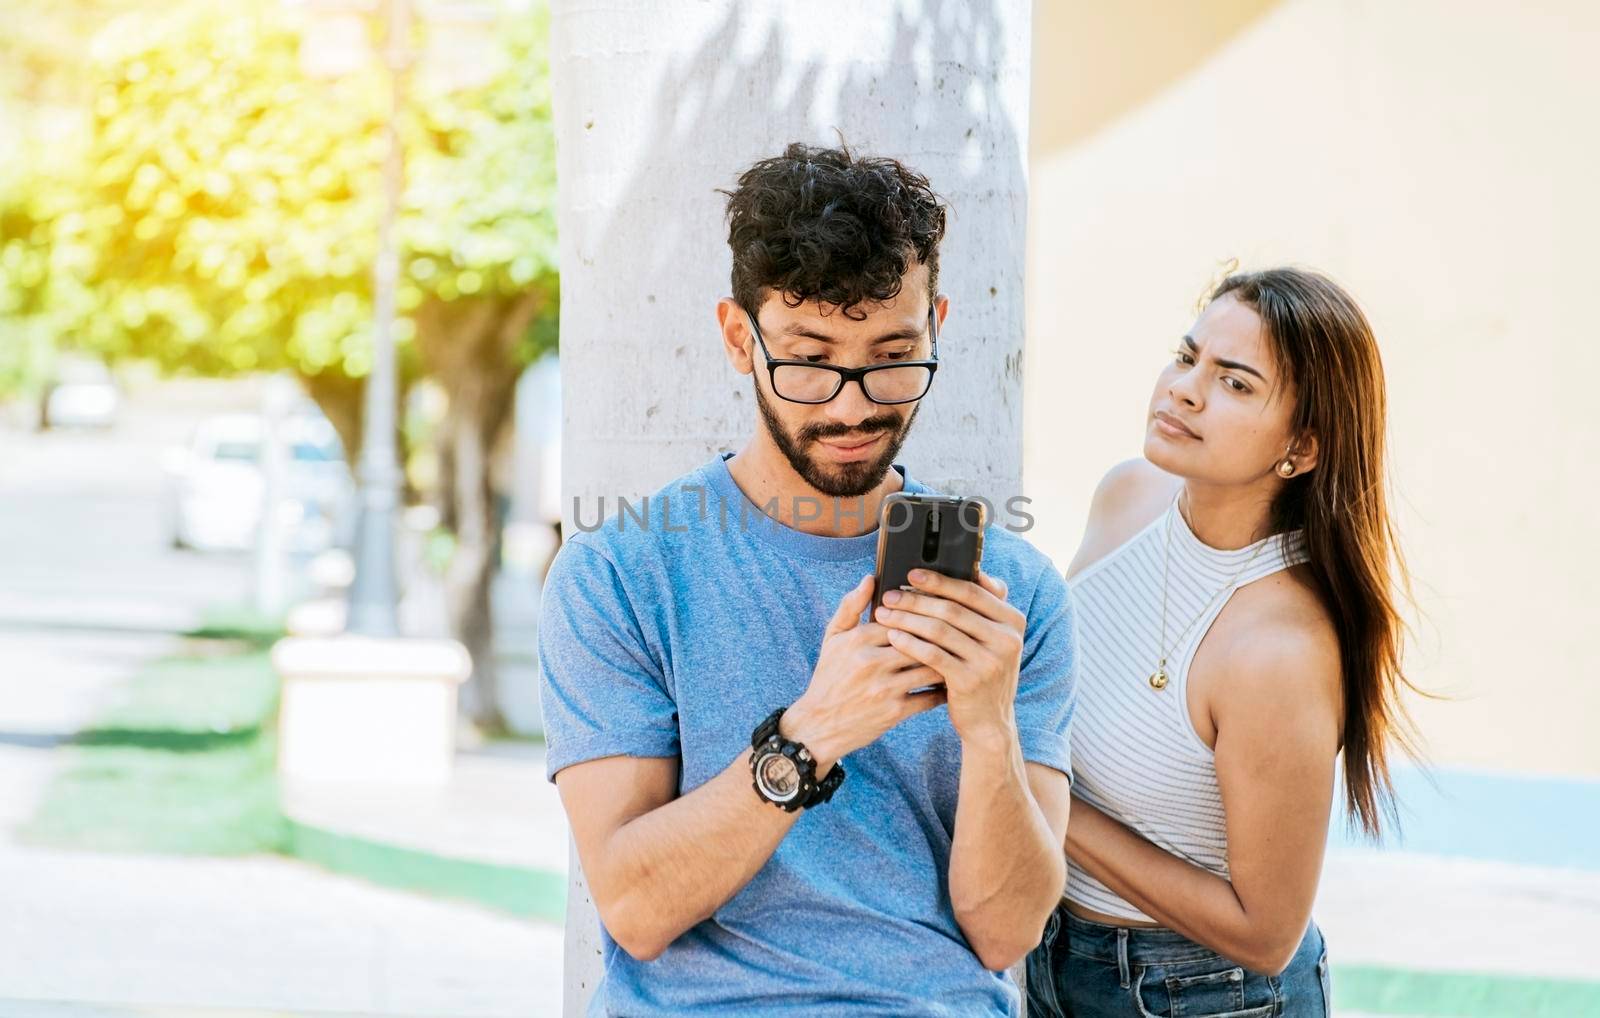 Suspicious girl spying on her boyfriend phone. Jealous girl spying on her boyfriend's cell phone in the park, Distrustful woman spying on her boyfriend's cell phone outdoors